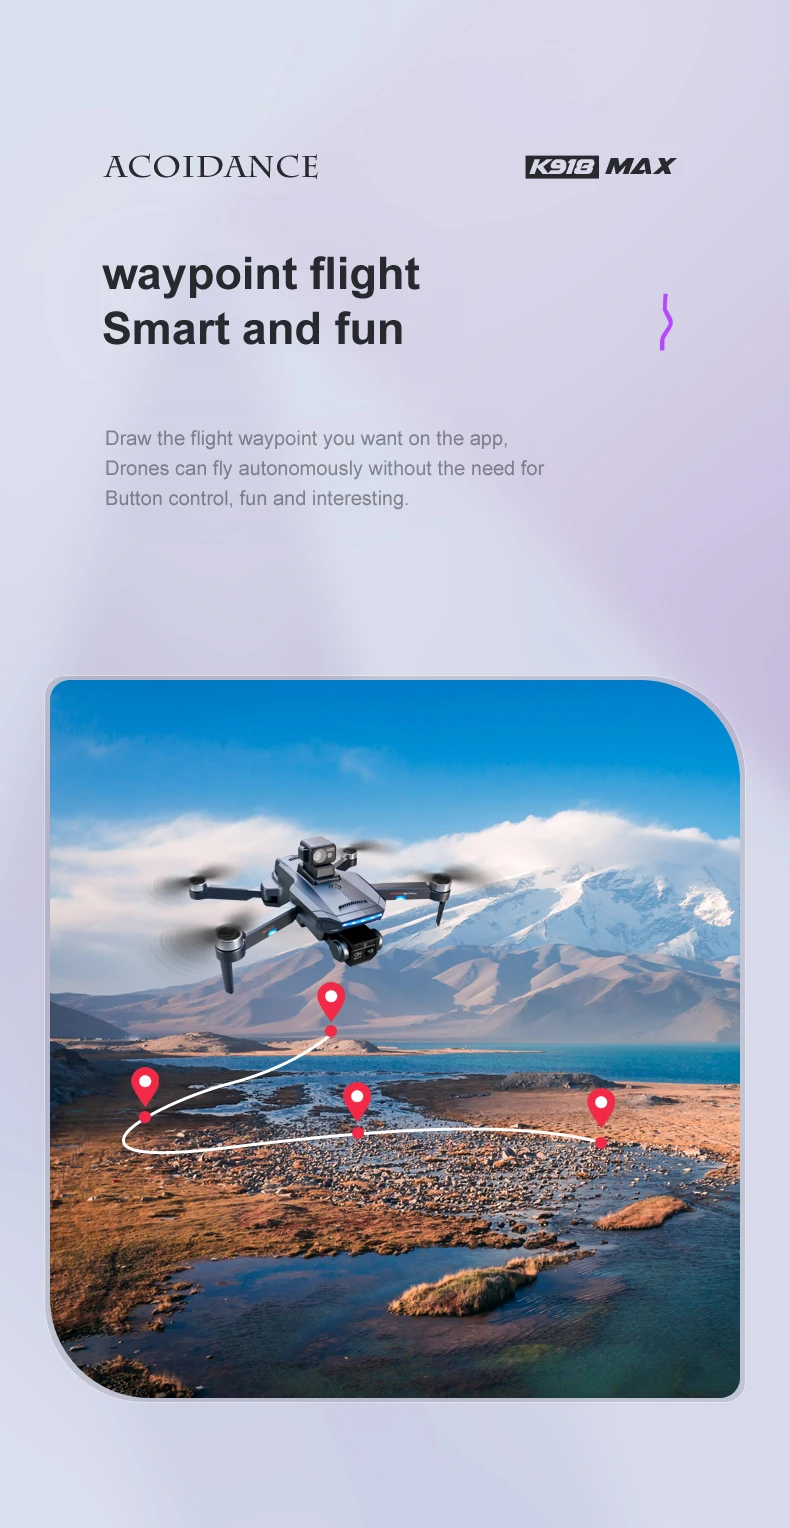 JINEHNG K918 MAX GPS Drone, Drones can fly autonomously without the need for button control, fun and interesting .